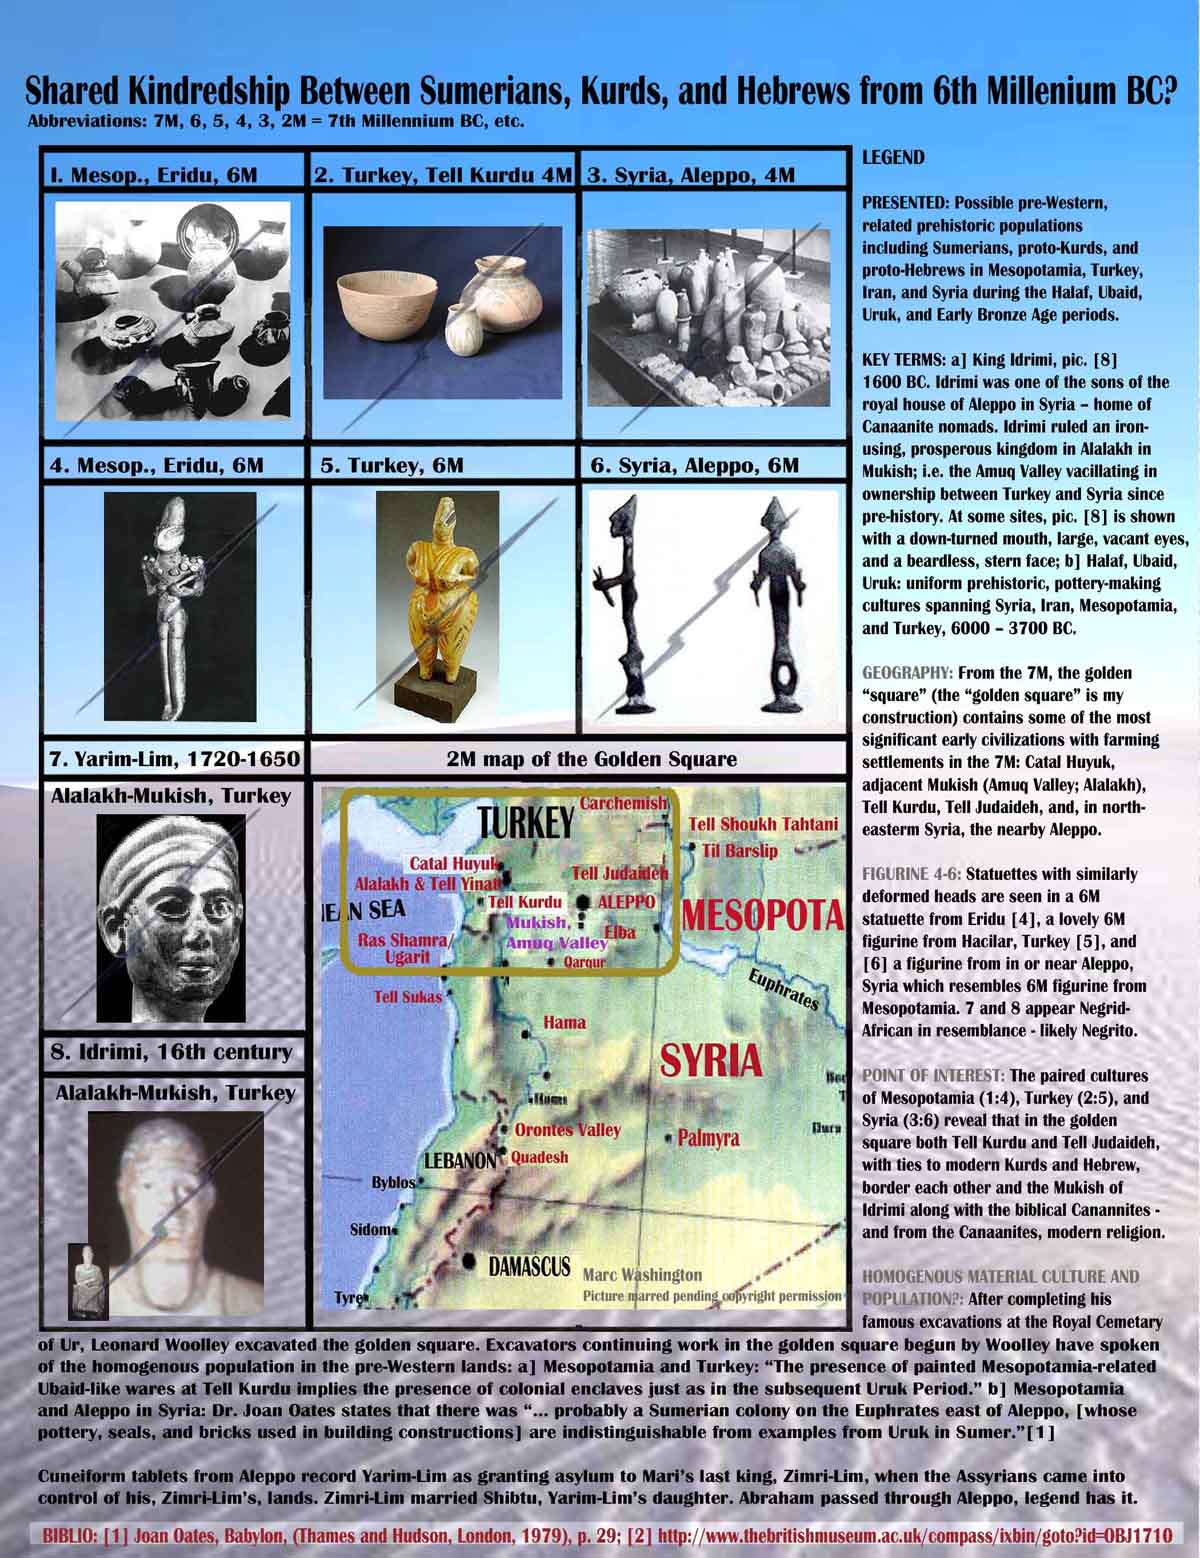 PRESENTED: Possible pre-Western, 
related prehistoric populations 
including Sumerians, proto-Kurds, and 
proto-Hebrews in Mesopotamia, Turkey,
Iran, and Syria during the Halaf, Ubaid, 
Uruk, and Early Bronze Age periods.

KEY TERMS: a] King Idrimi, pic. [8]
1600 BC. Idrimi was one of the sons of the 
royal house of Aleppo in Syria  home of 
Canaanite nomads. Idrimi ruled an iron-
using, prosperous kingdom in Alalakh in 
Mukish; i.e. the Amuq Valley vacillating in 
ownership between Turkey and Syria since 
pre-history. At some sites, pic. [8] is shown
with a down-turned mouth, large, vacant eyes,
and a beardless, stern face; b] Halaf, Ubaid, 
Uruk: uniform prehistoric, pottery-making 
cultures spanning Syria, Iran, Mesopotamia, 
and Turkey, 6000  3700 BC. 

GEOGRAPHY: From the 7M, the golden 
square (the golden square is my 
construction) contains some of the most 
significant early civilizations with farming
settlements in the 7M: Catal Huyuk, 
adjacent Mukish (Amuq Valley; Alalakh), 
Tell Kurdu, Tell Judaideh, and, in north-
easterm Syria, the nearby Aleppo.

FIGURINE 4-6: Statuettes with similarly 
deformed heads are seen in a 6M
statuette from Eridu [4], a lovely 6M 
figurine from Hacilar, Turkey [5], and 
[6] a figurine from in or near Aleppo, 
Syria which resembles 6M figurine from
Mesopotamia. 7 and 8 appear Negrid-
African in resemblance - likely Negrito.

POINT OF INTEREST: The paired cultures
of Mesopotamia (1:4), Turkey (2:5), and 
Syria (3:6) reveal that in the golden 
square both Tell Kurdu and Tell Judaideh,
with ties to modern Kurds and Hebrew, 
border each other and the Mukish of 
Idrimi along with the biblical Canannites -
and from the Canaanites, modern religion.

HOMOGENOUS MATERIAL CULTURE AND 
POPULATION?: After completing his 
famous excavations at the Royal Cemetary of Ur, Leonard Woolley excavated the golden square. Excavators continuing work in the golden square begun by Woolley have spoken 
of the homogenous population in the pre-Western lands: a] Mesopotamia and Turkey: The presence of painted Mesopotamia-related 
Ubaid-like wares at Tell Kurdu implies the presence of colonial enclaves just as in the subsequent Uruk Period. b] Mesopotamia 
and Aleppo in Syria: Dr. Joan Oates states that there was  probably a Sumerian colony on the Euphrates east of Aleppo, [whose 
pottery, seals, and bricks used in building constructions] are indistinguishable from examples from Uruk in Sumer.[1]
, Paul Marc Washington, paleoneolithic@yahoo.com 